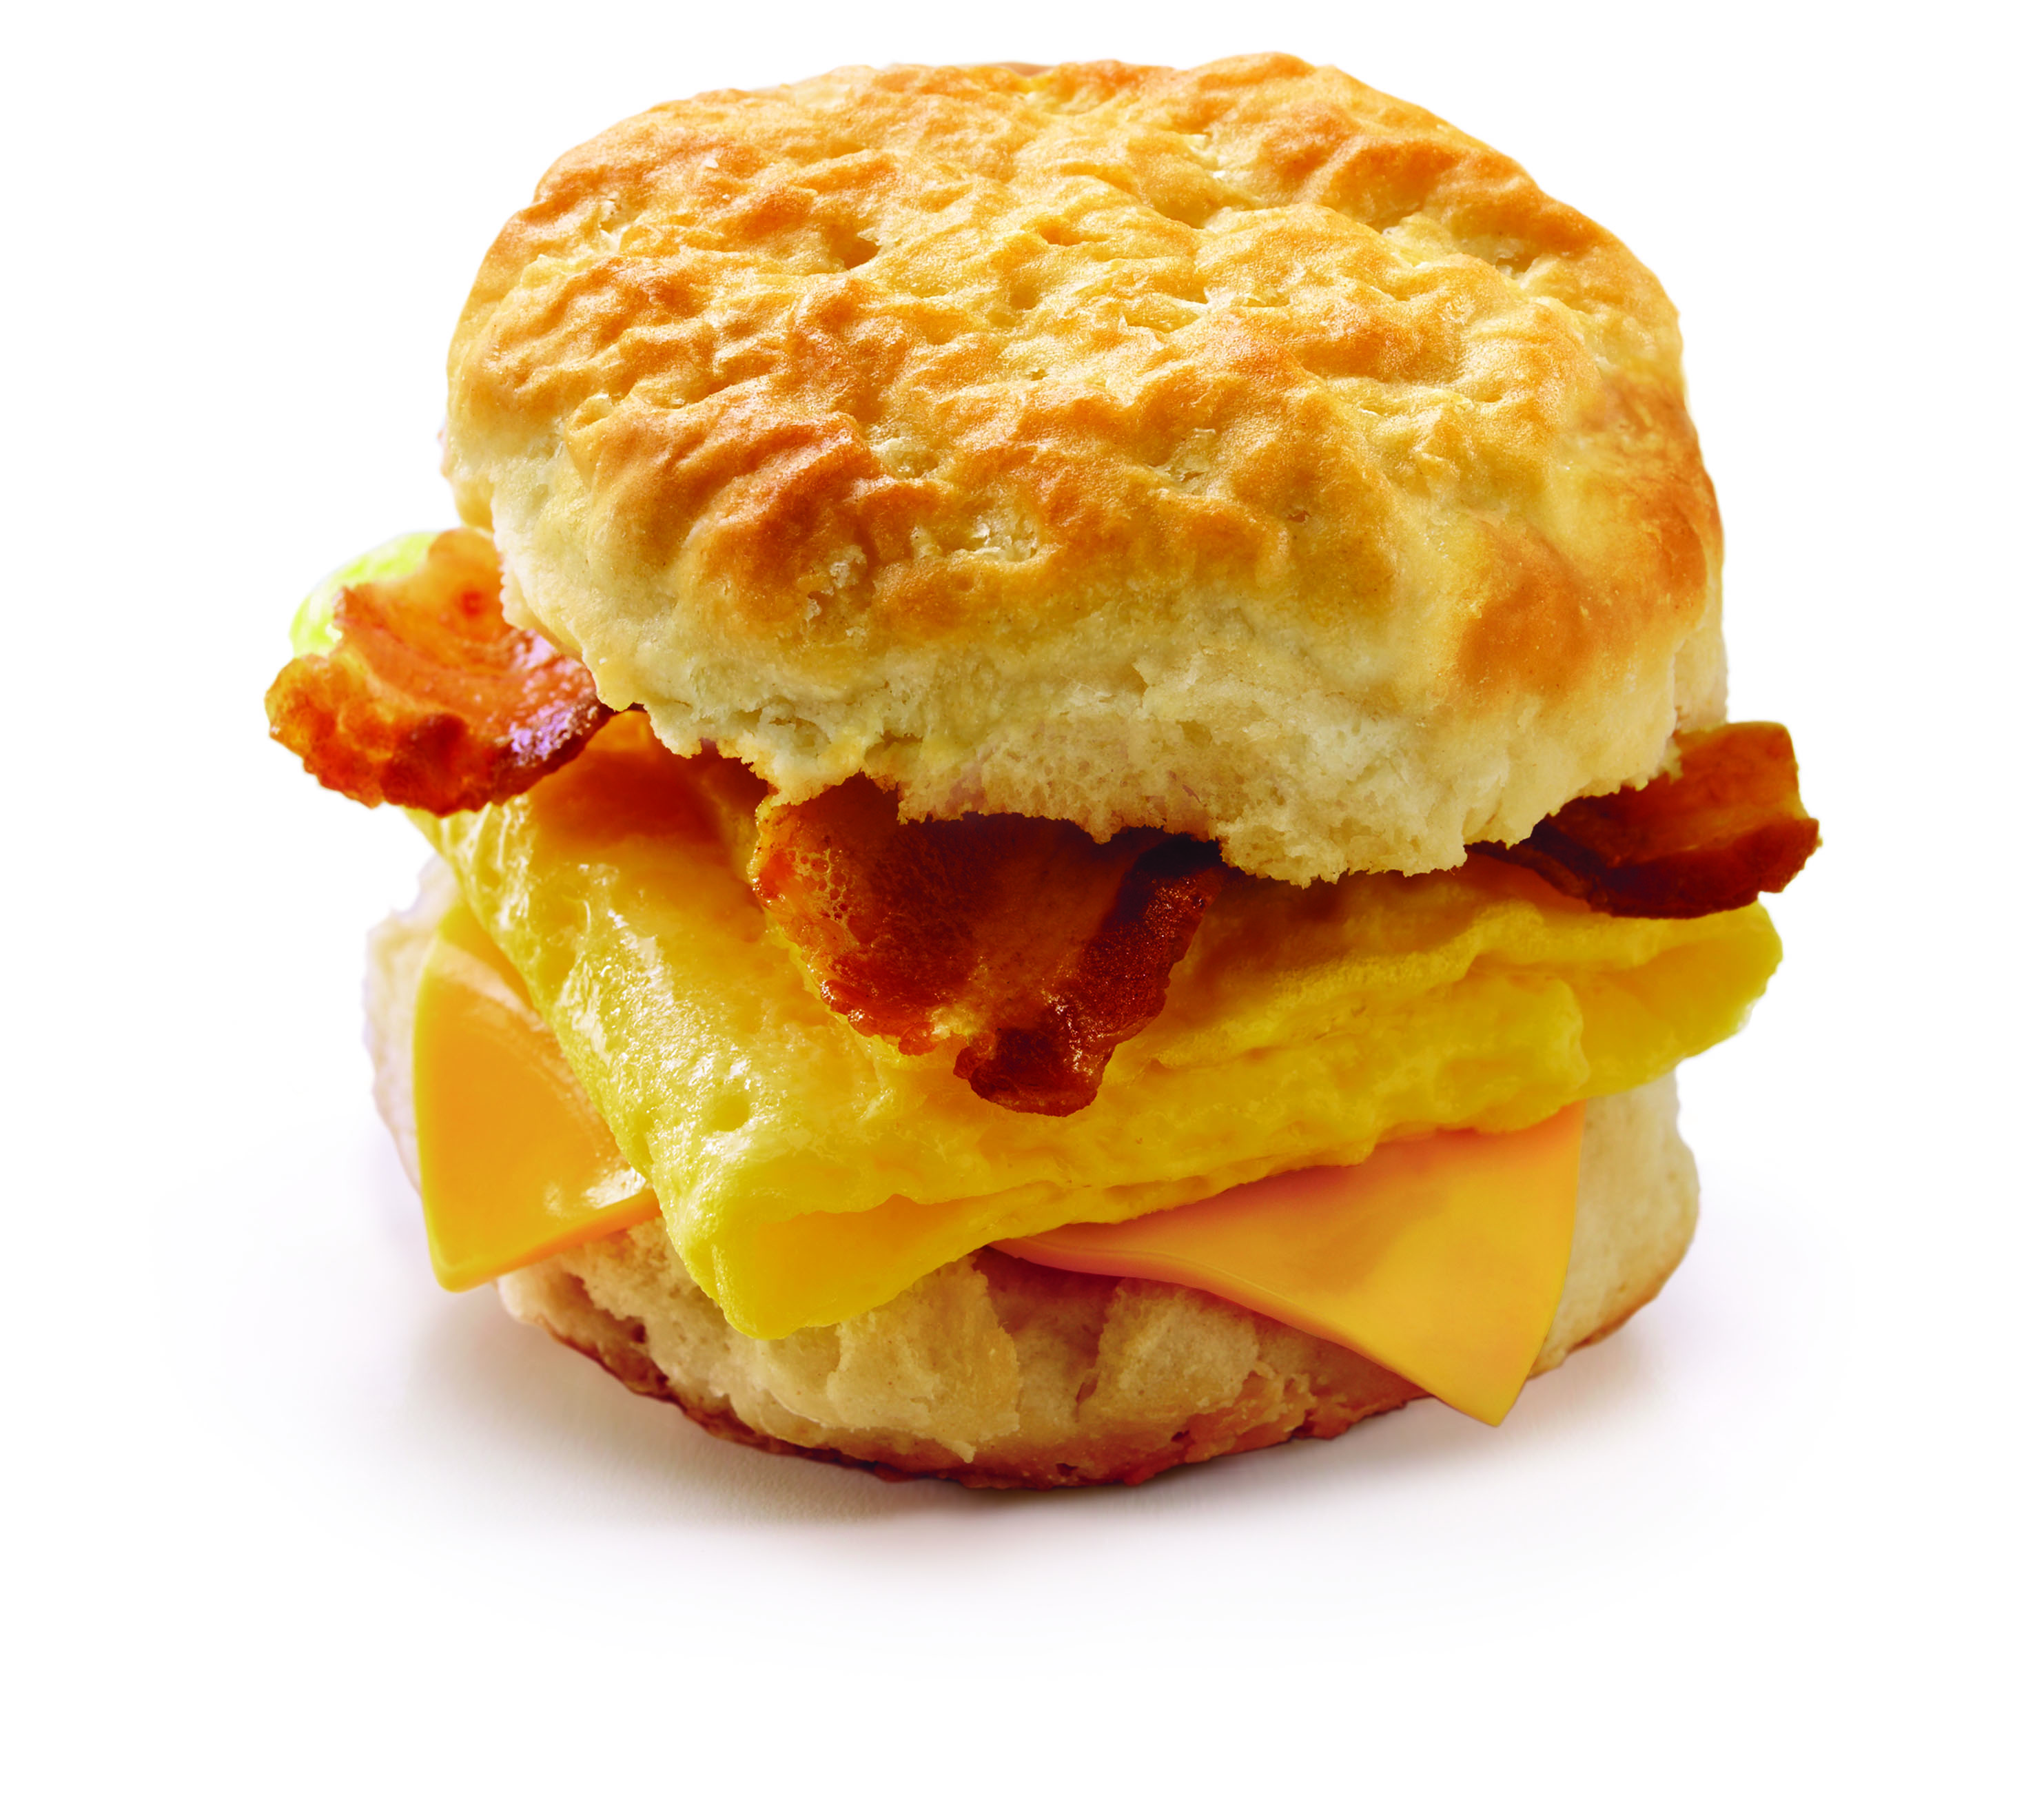 Mcdonald's Canada - Sausage and Egg Buscuit Sandwich